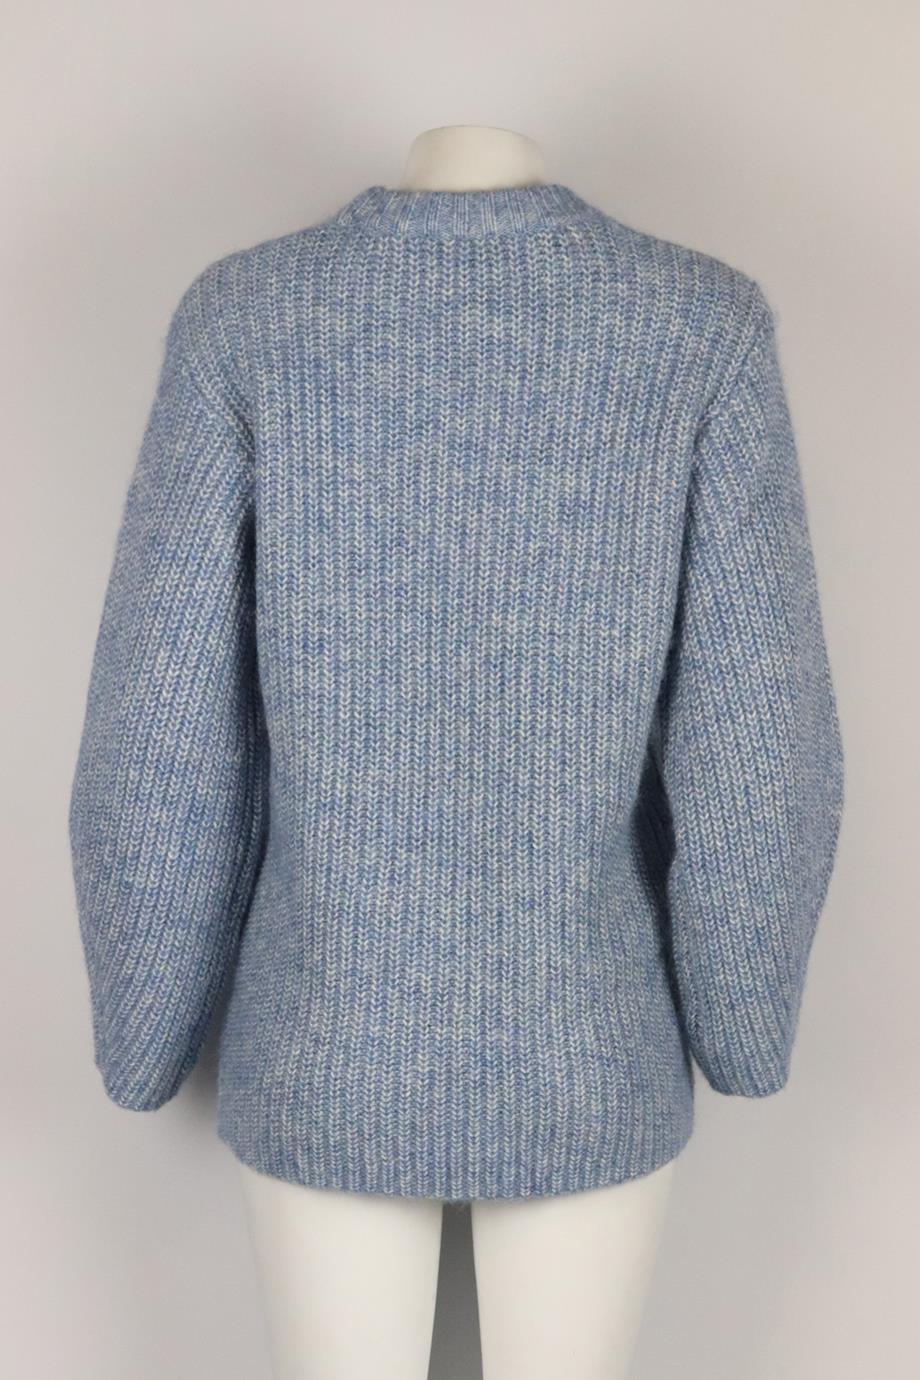 HATCH RIBBED COTTON BLEND SWEATER UK 8